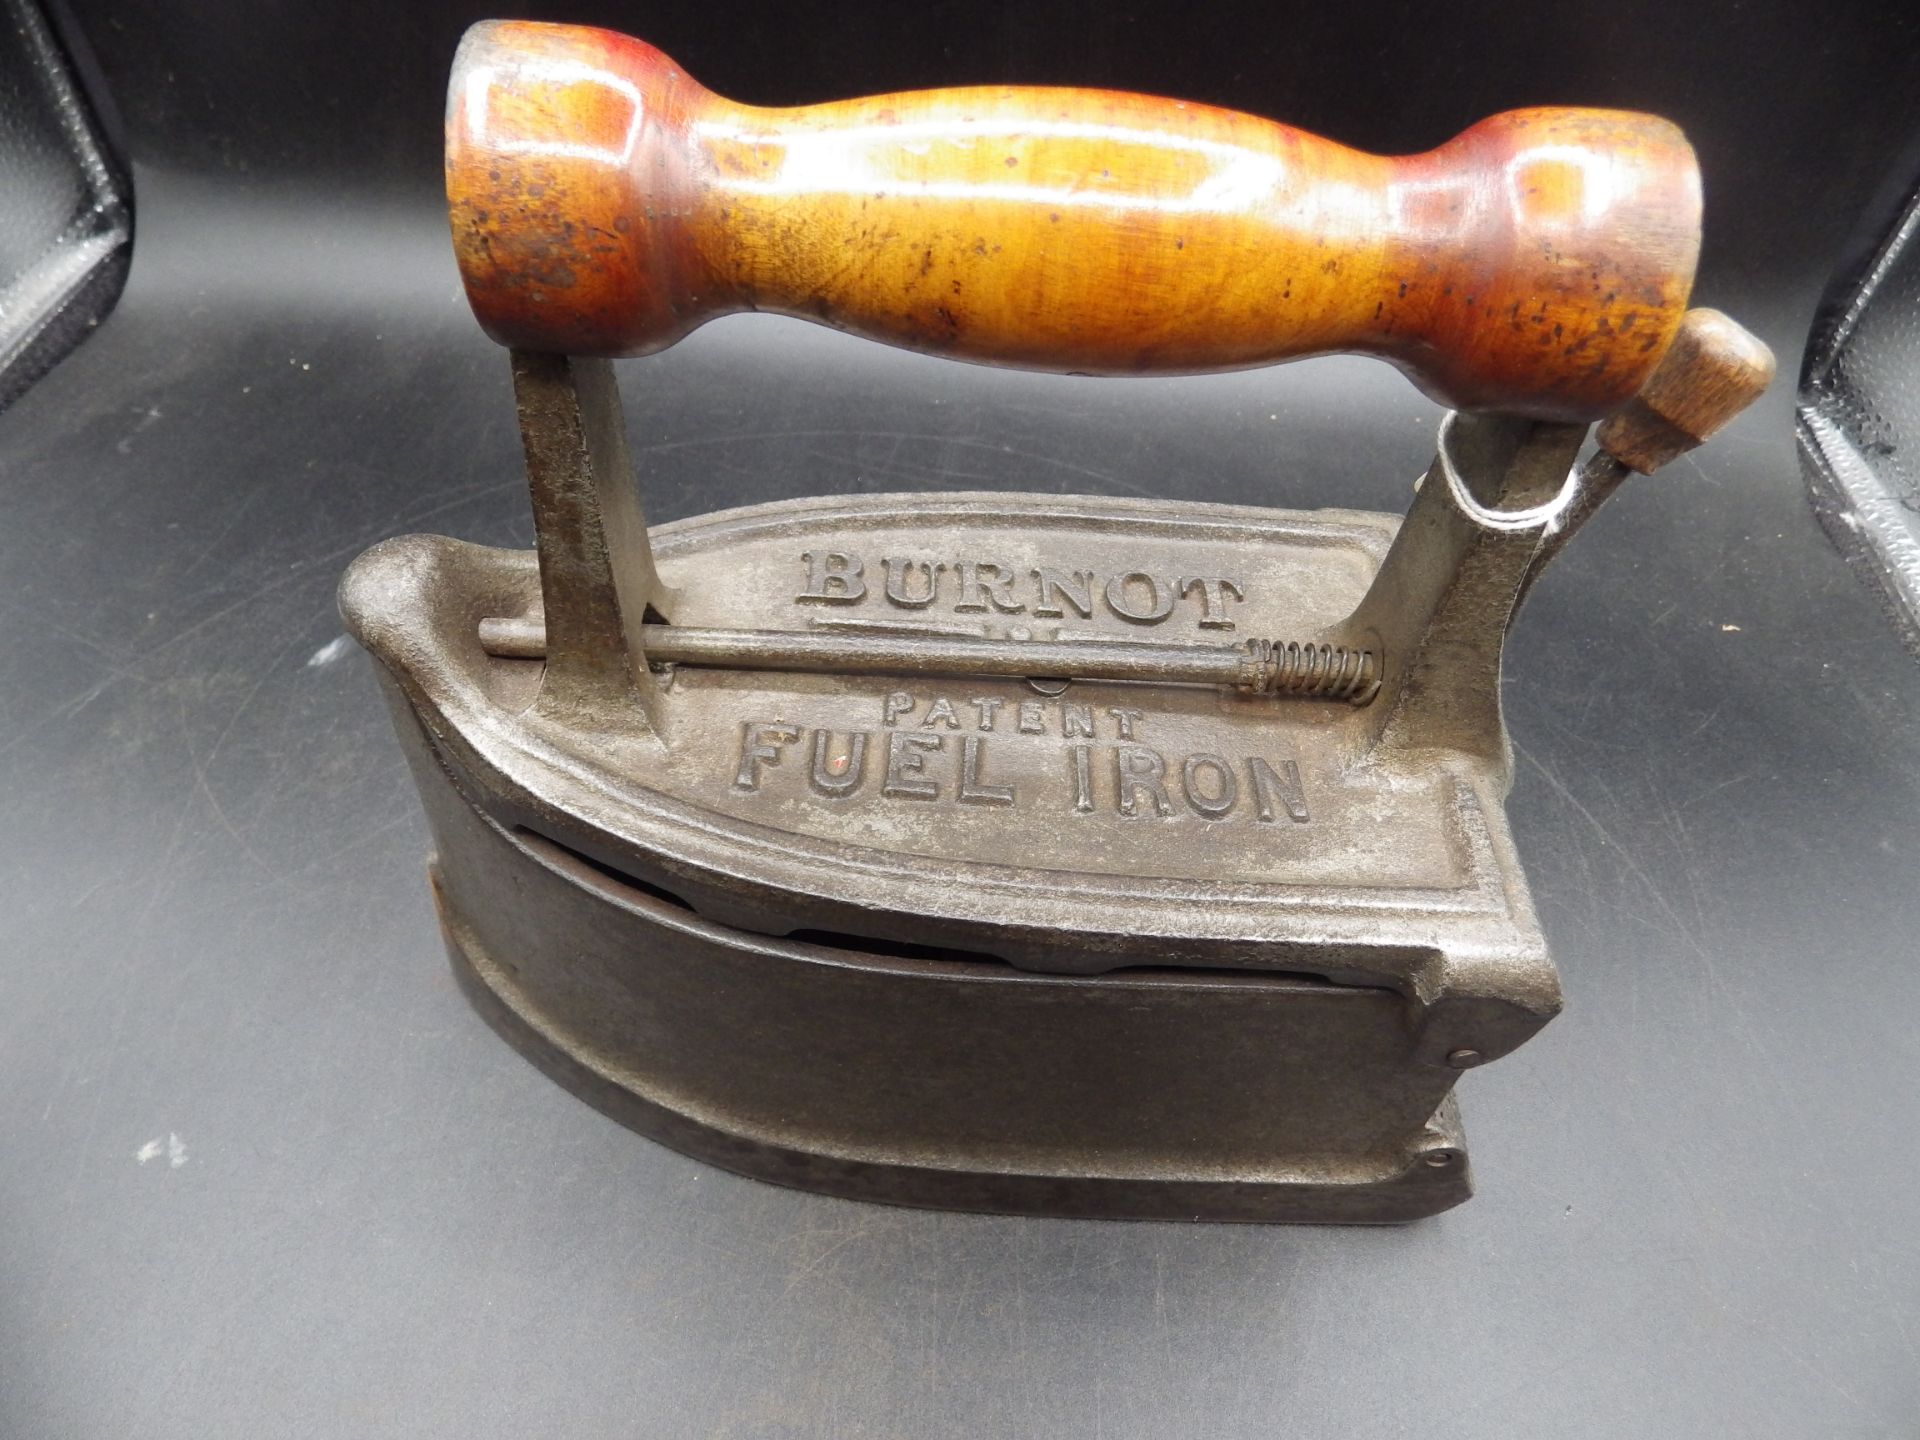 2 fuel irons to include the Burnot patent fuel iron with lever spring bolt and ash guard together - Image 3 of 4